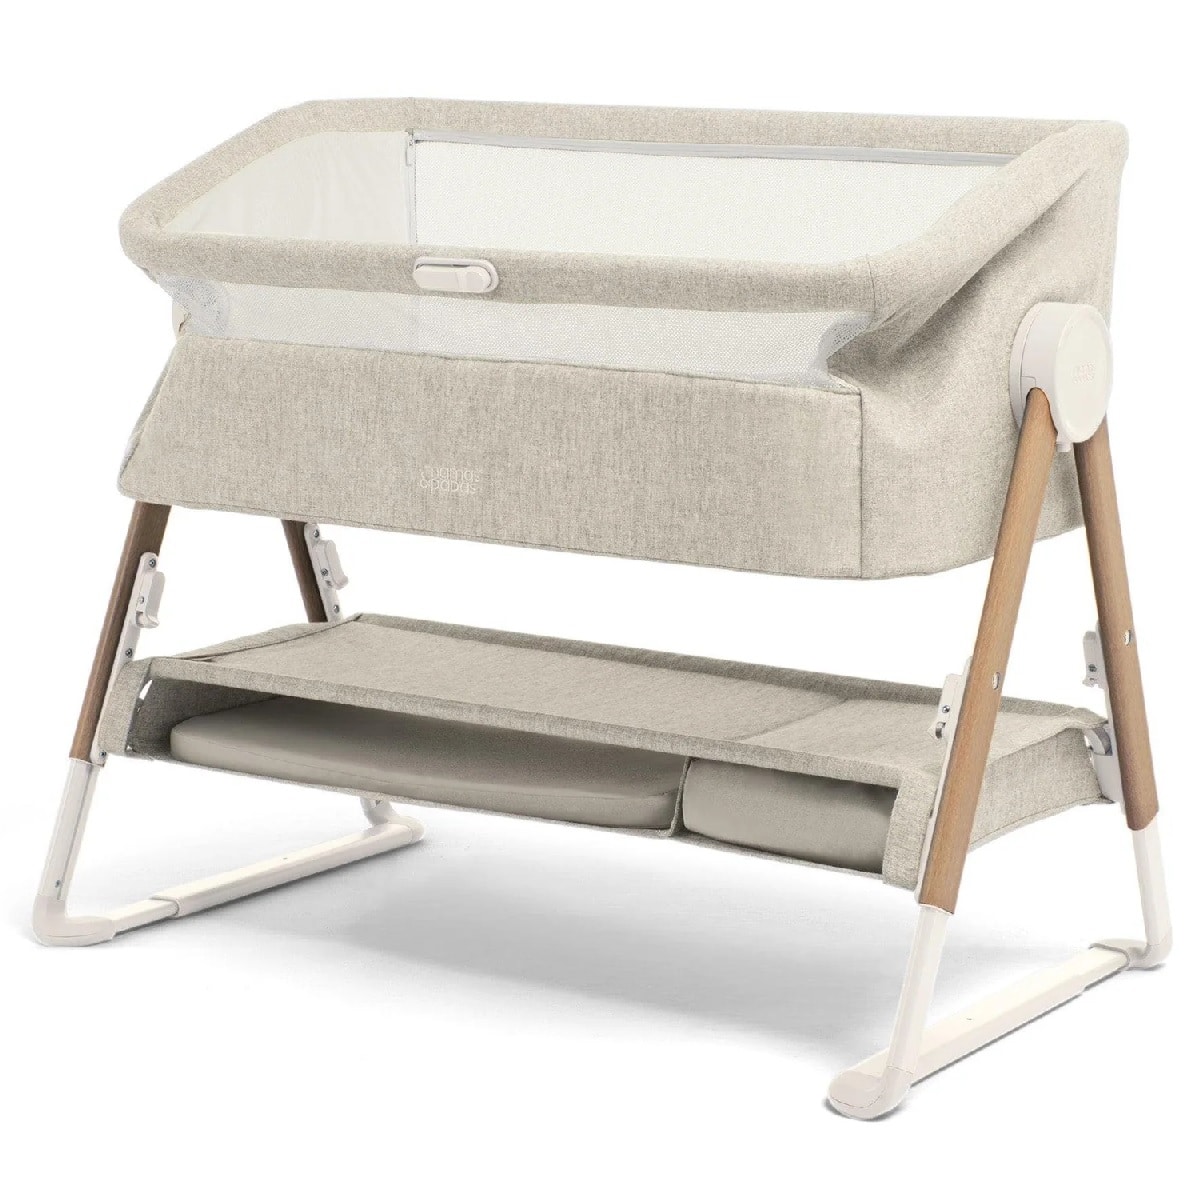 Safe, Sweet Dreams for Your Baby: Tutti Bambini Cozee Cribs